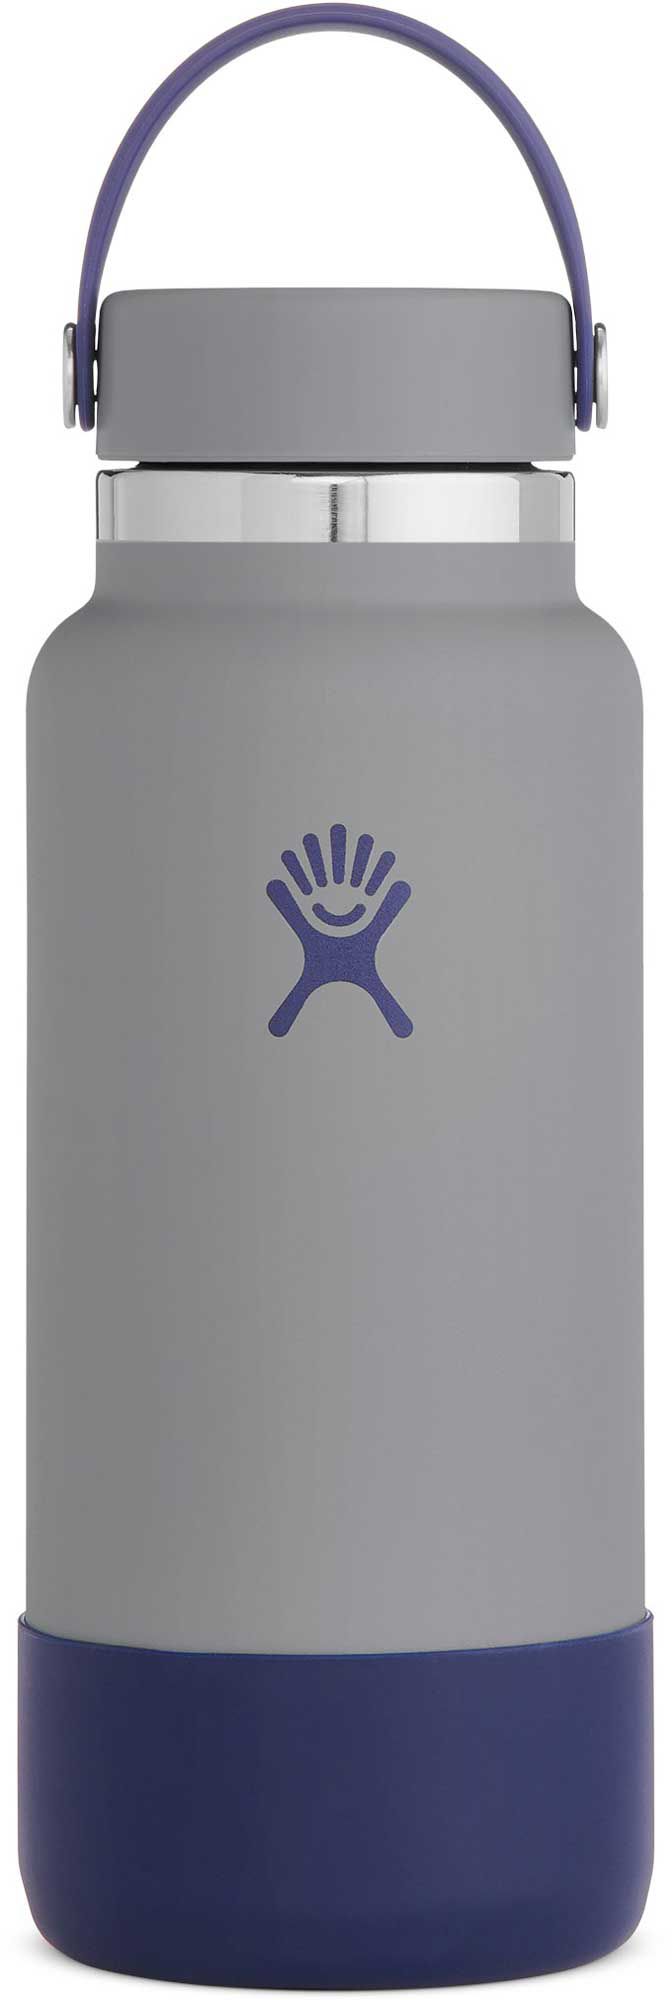 violet hydro flask